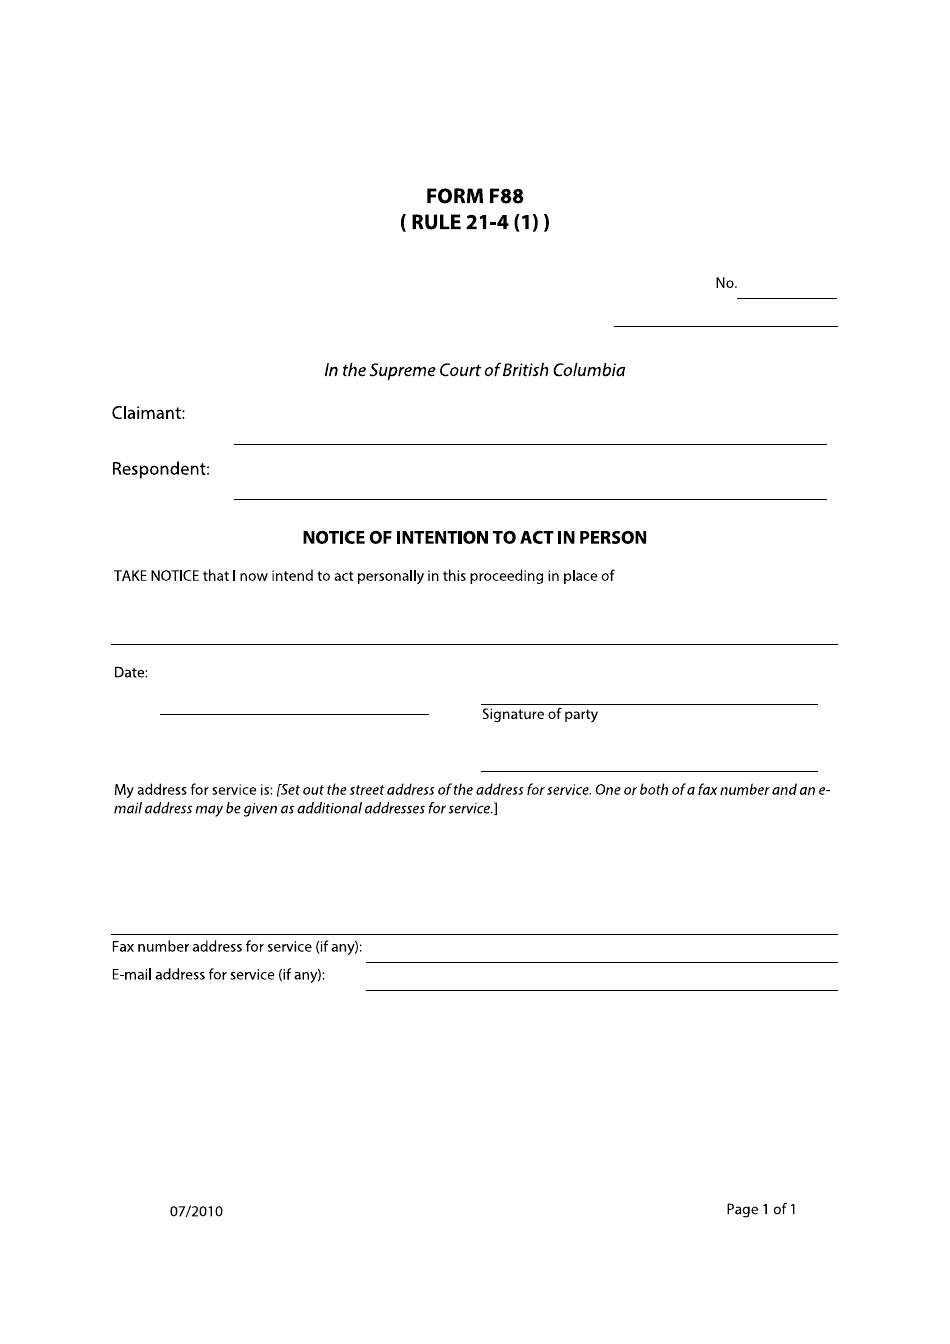 Form F88 Notice of Intention to Act in Person - British Columbia, Canada, Page 1